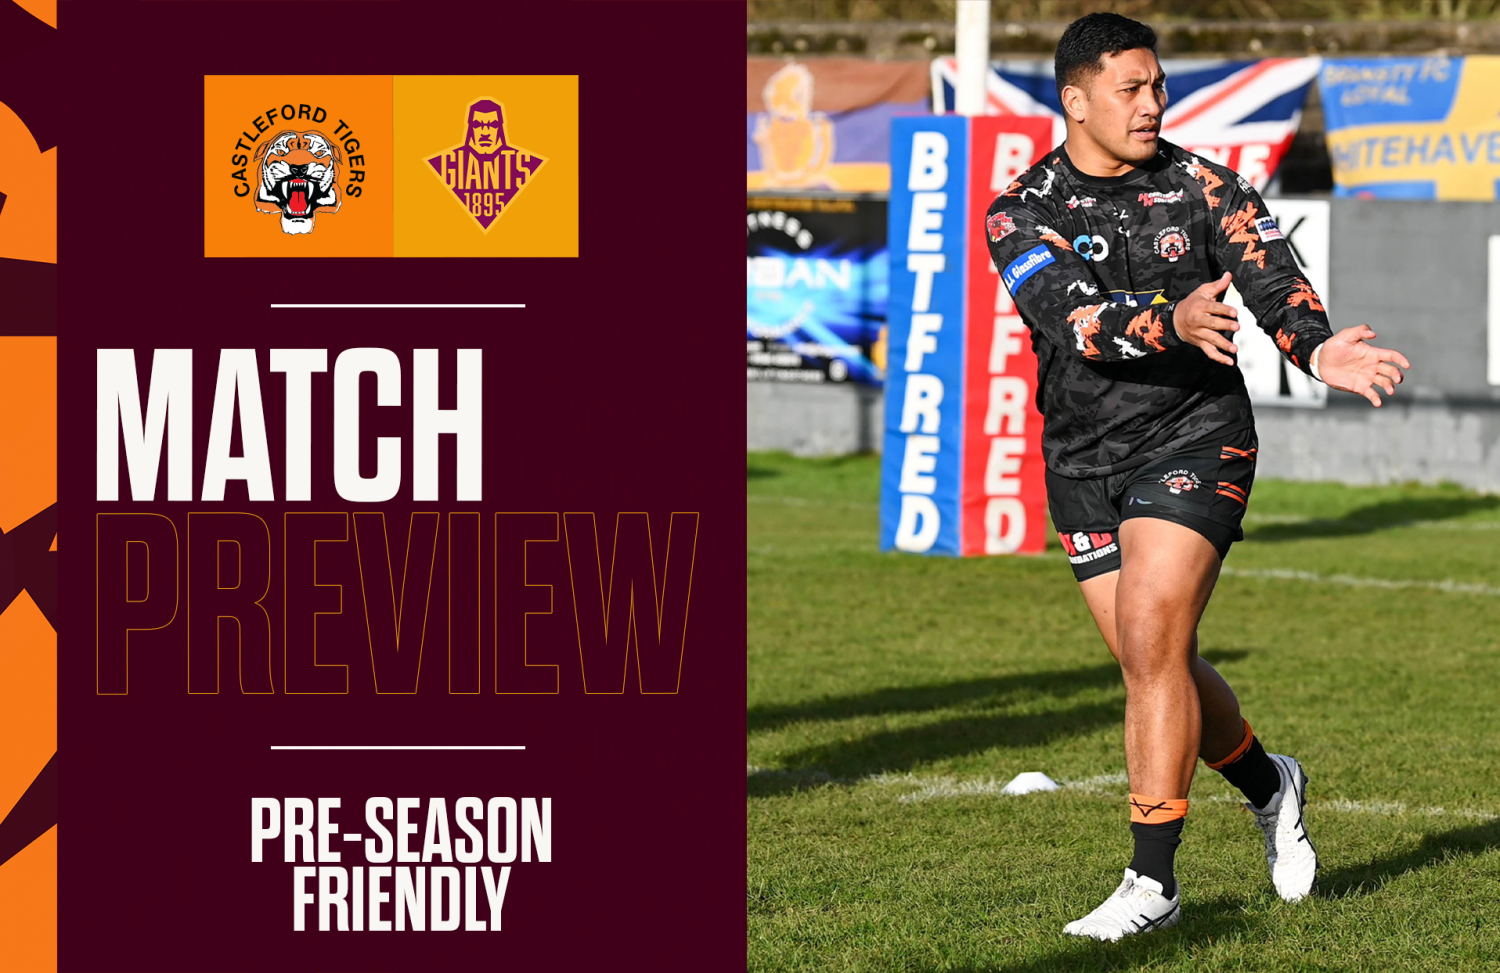 MATCH PREVIEW CASTLEFORD TIGERS